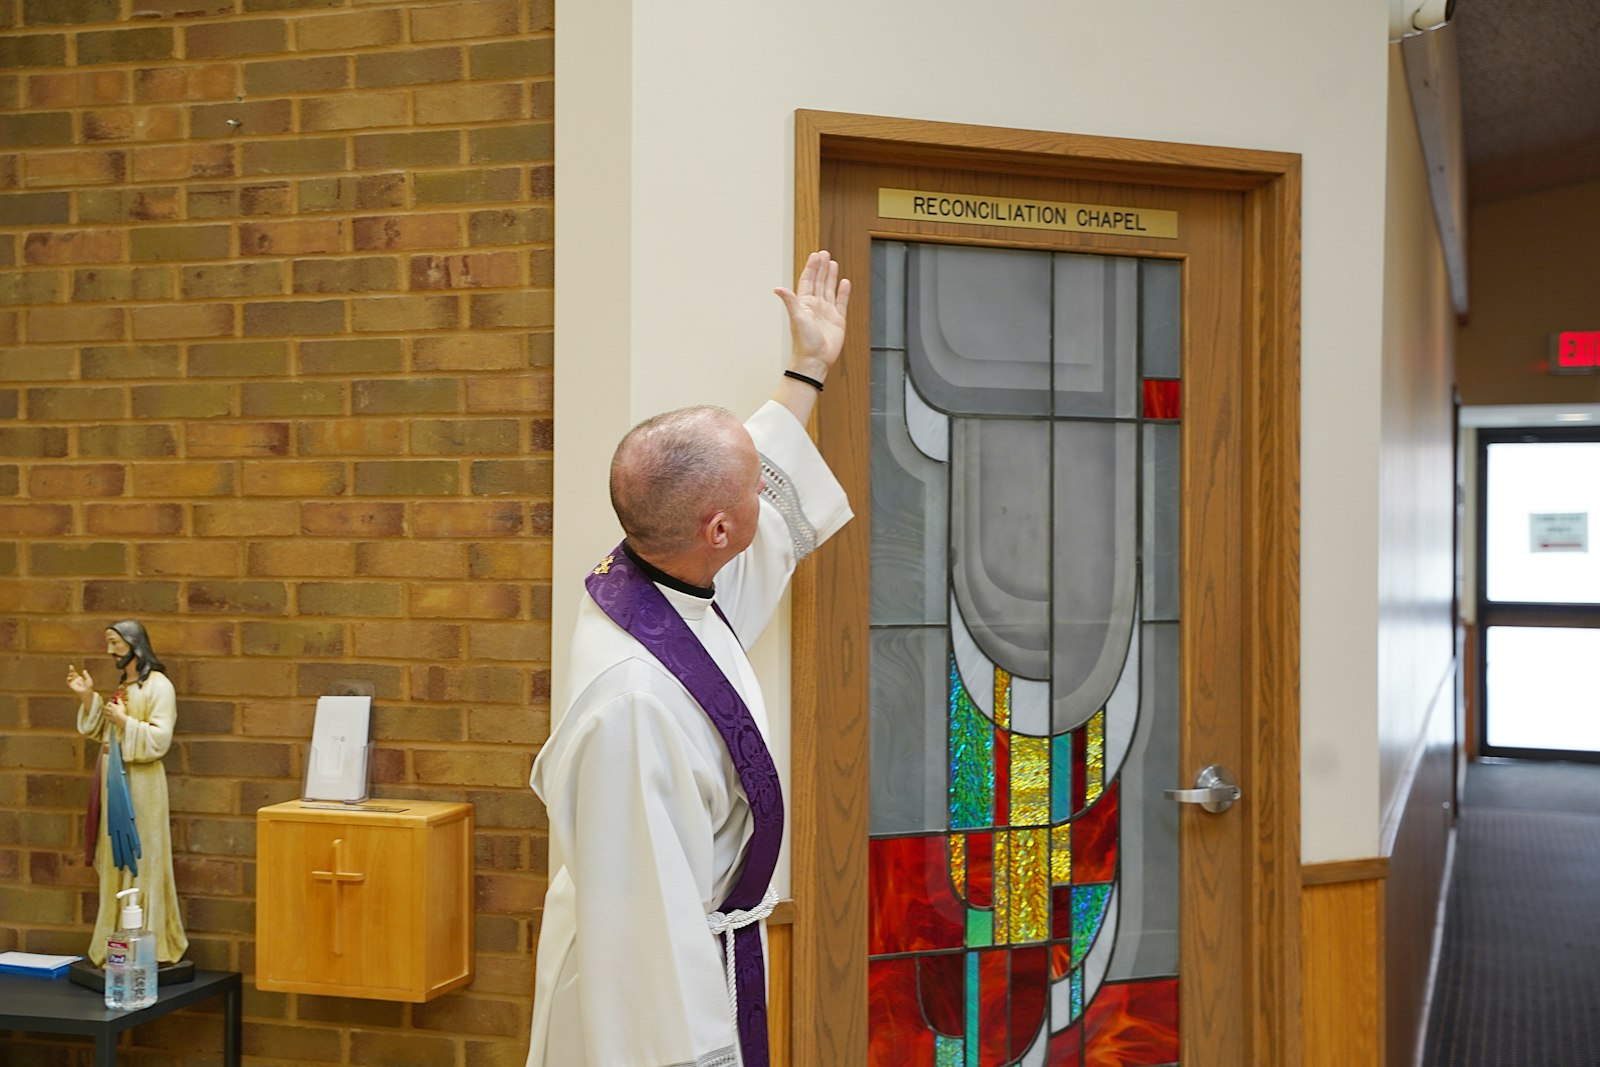 Fr. Dawson points out the sign on Prince of Peace's reconciliation room, which was recently refurbished with the help of parishioners, who donated $20,000 for the project, as well as to purchase new sacred vessels to be used during Mass.